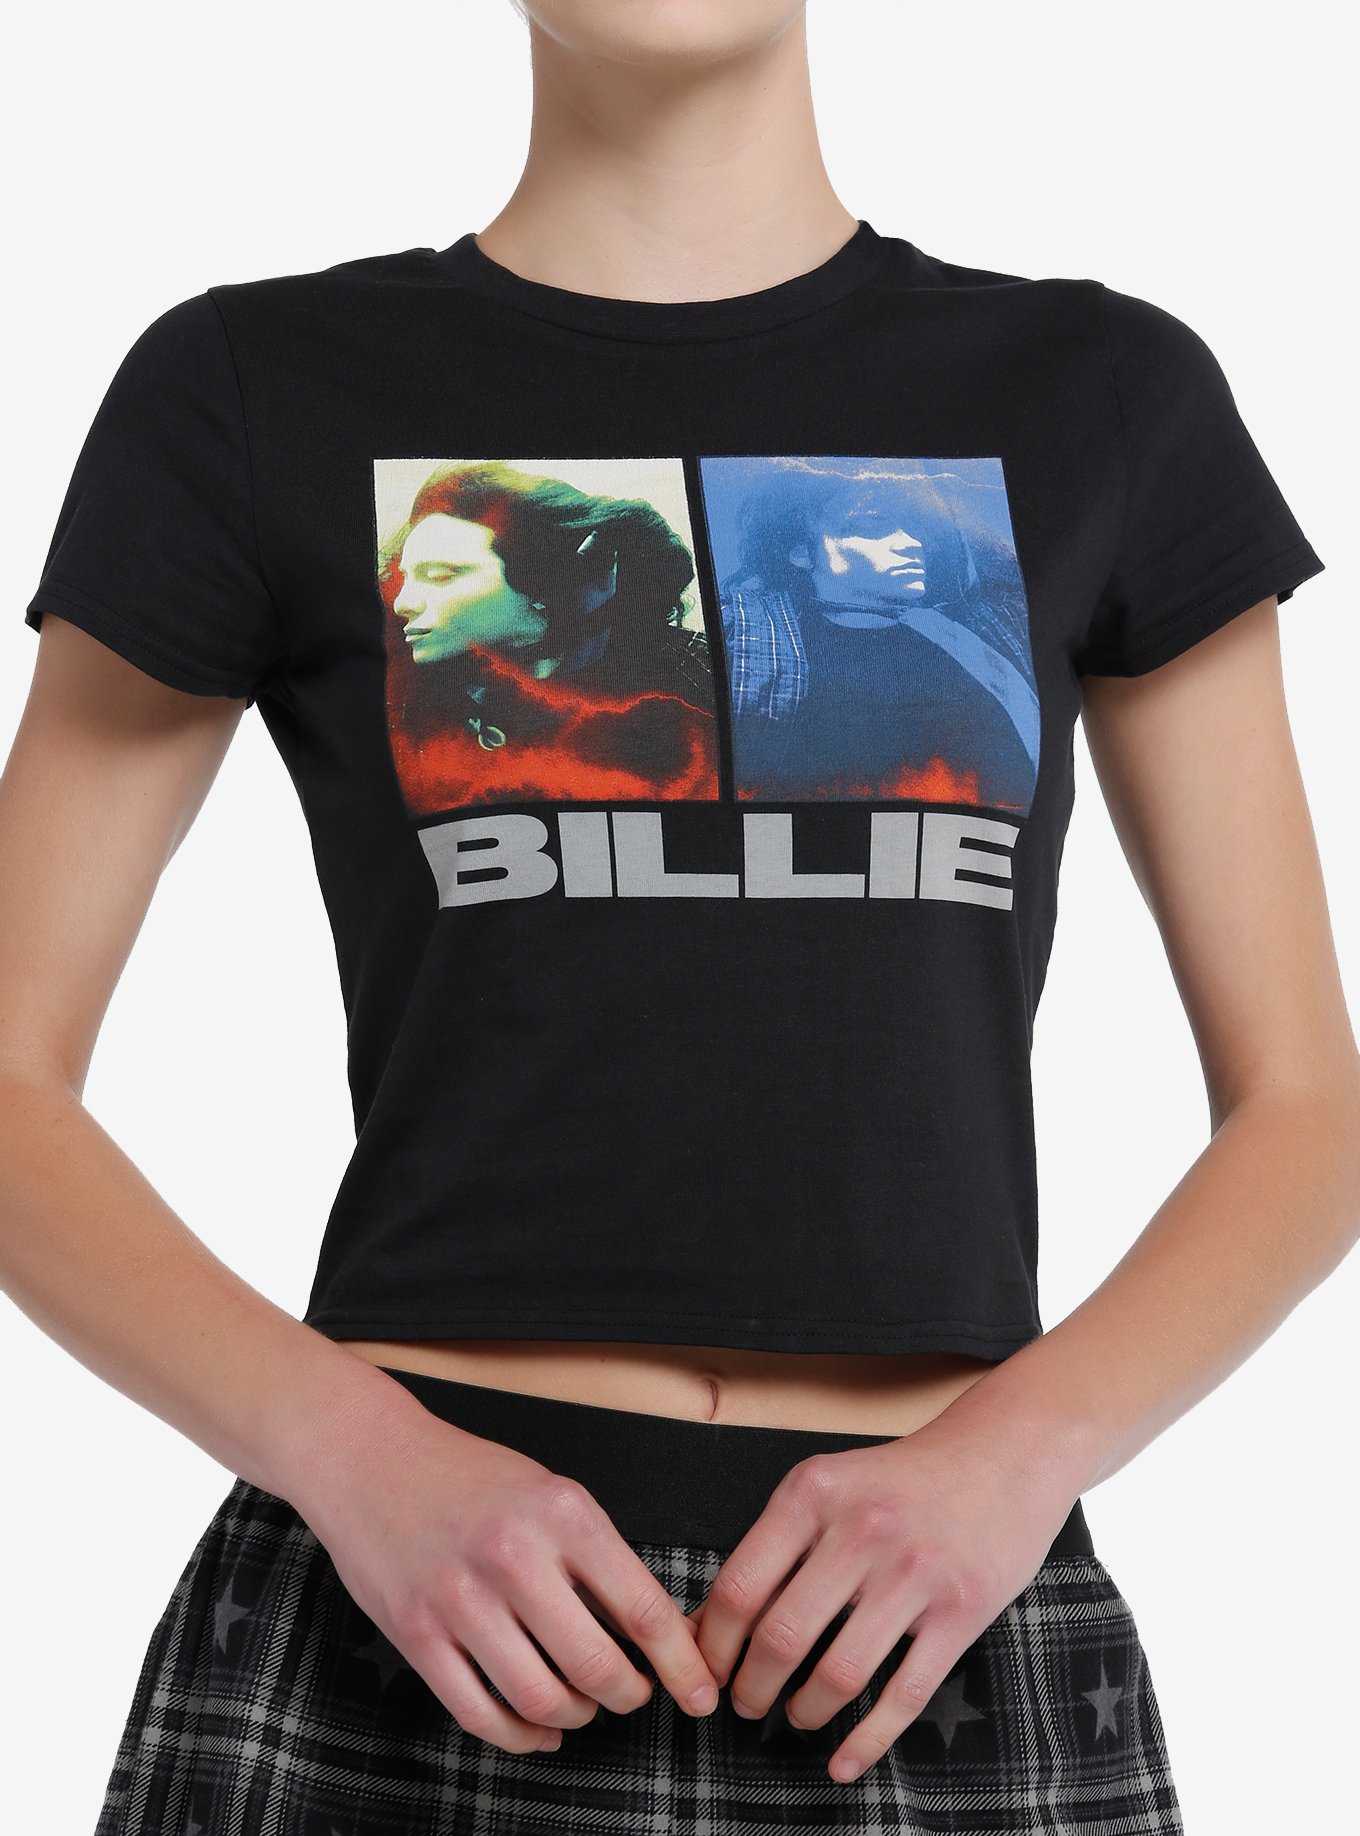 Billie Eilish Hit Me Hard And Soft Double Portrait Girls Baby T-Shirt Hot Topic Exclusive, , hi-res